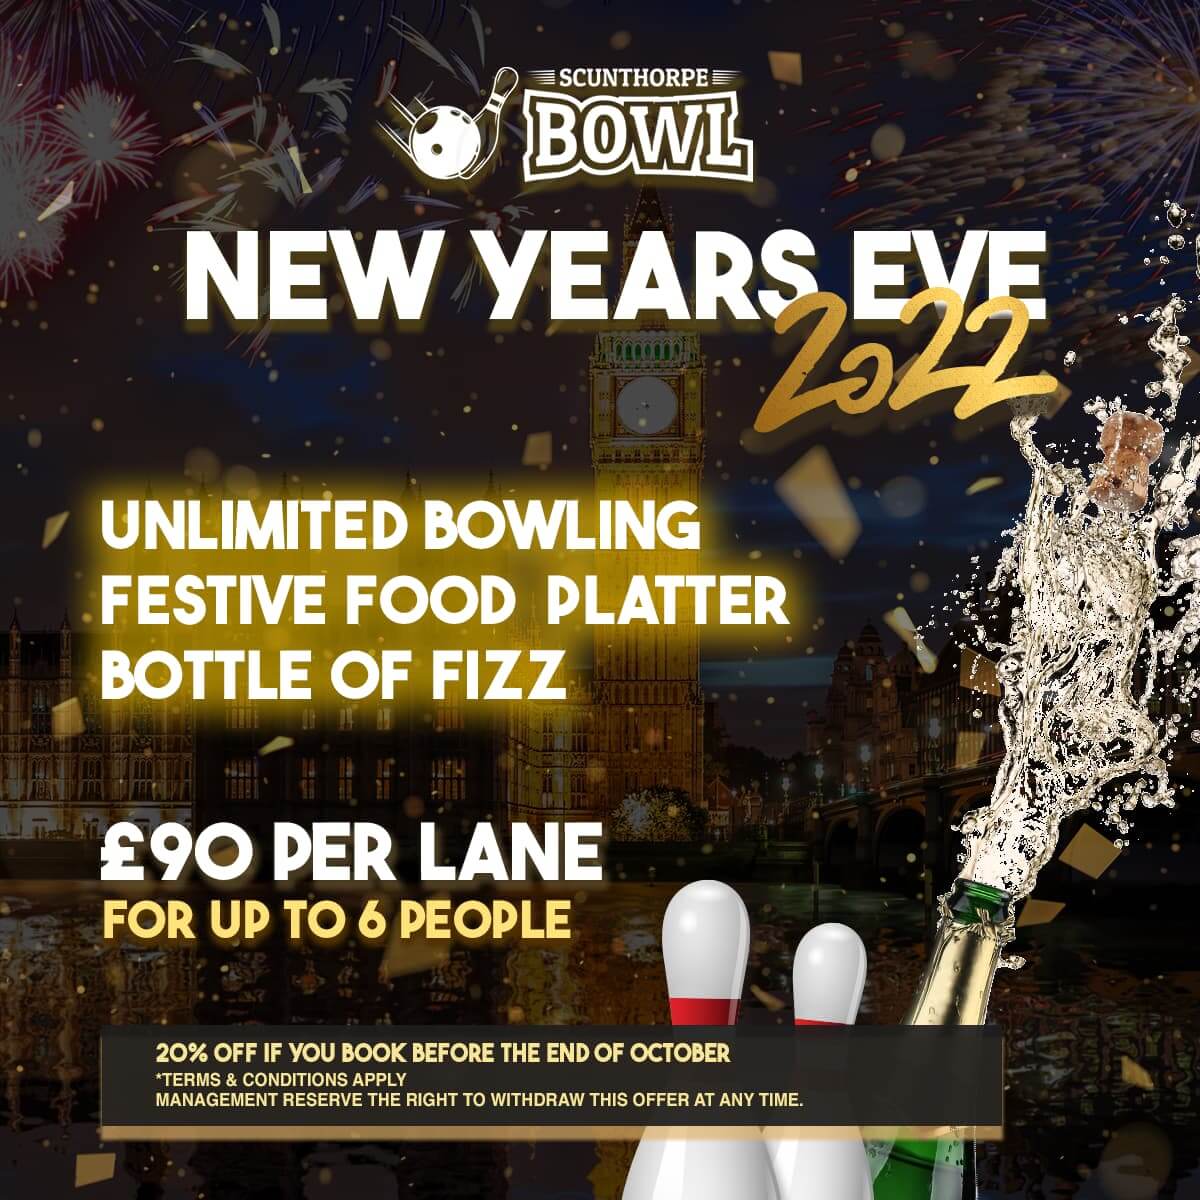 SCUNTHORPE BOWL NEW YEARS EVE PACKAGE Scunthorpe Bowl